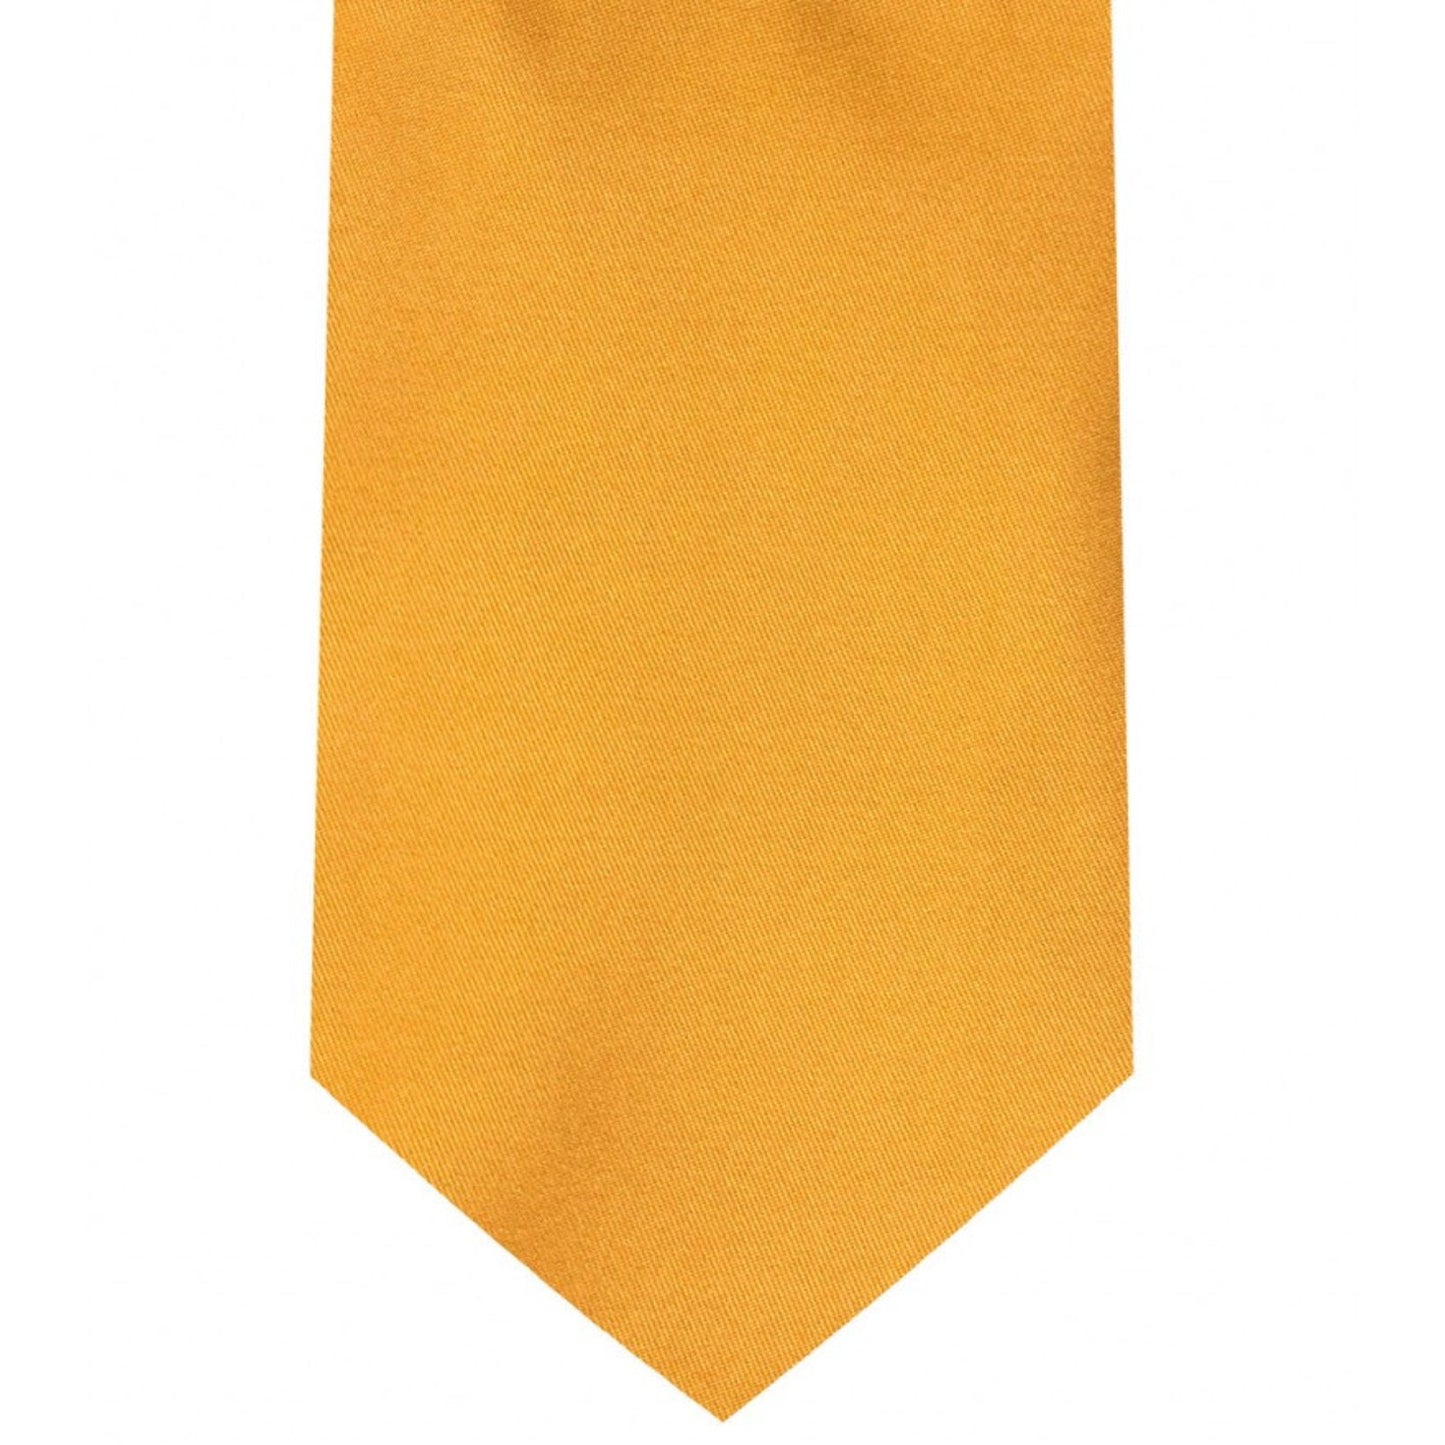 Classic Orange Tie Regular width 3.5 inches With Matching Pocket Square | KCT Menswear